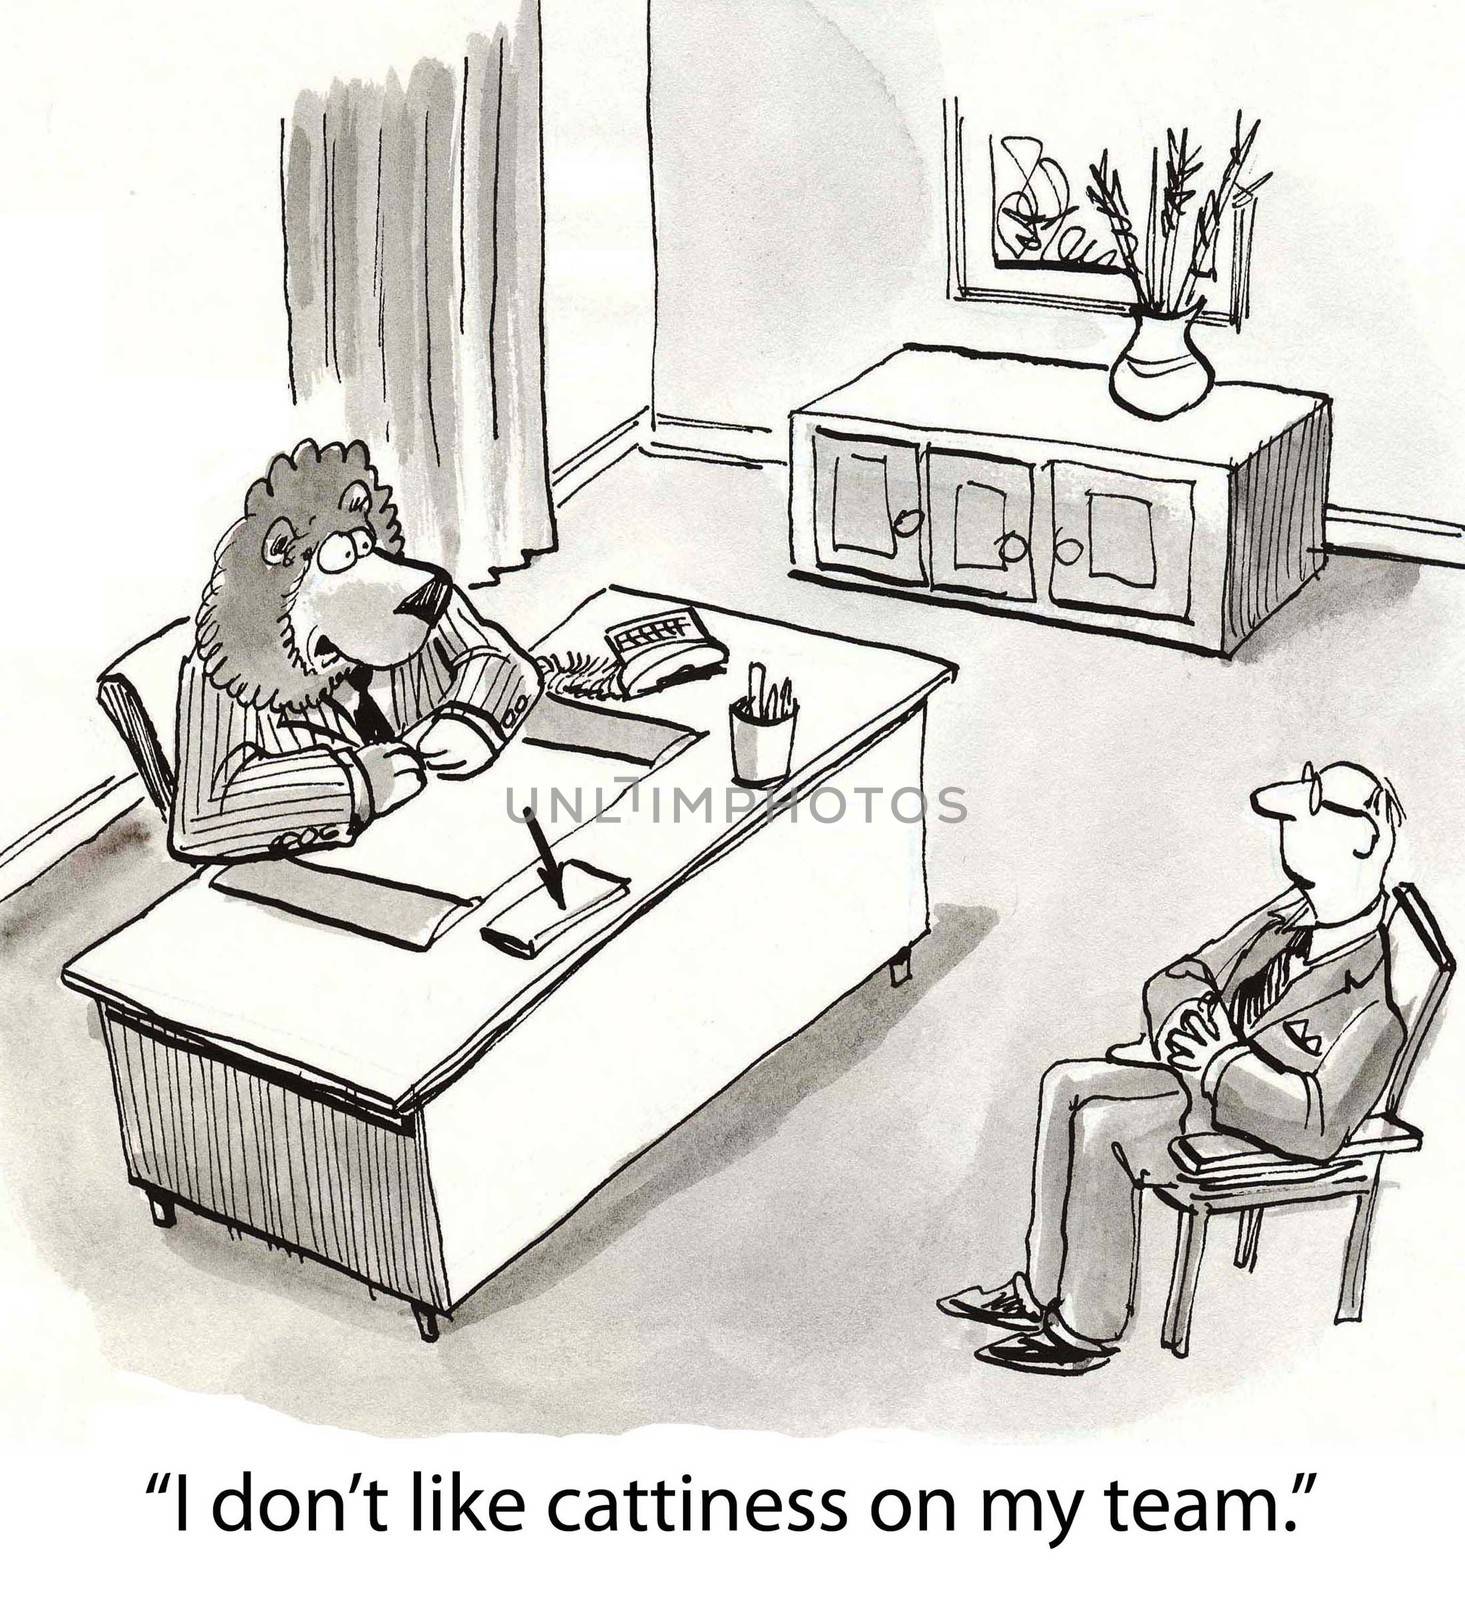 "I don't like cattiness on my team."